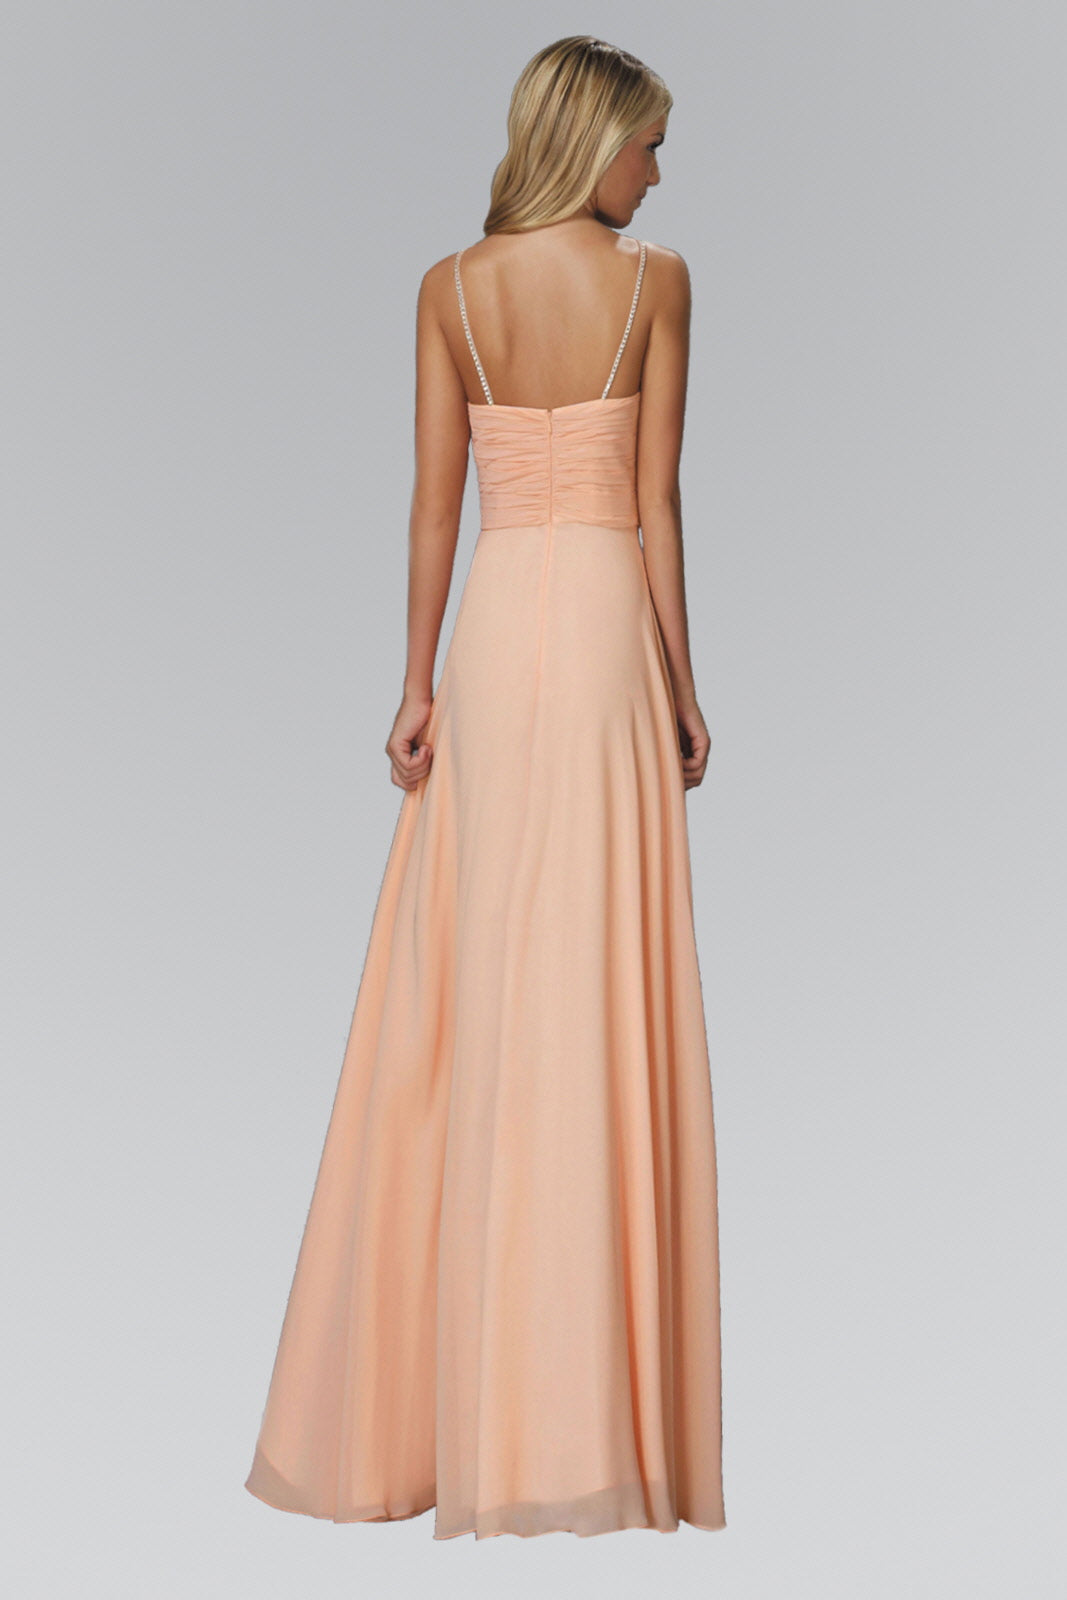 Spaghetti Straps Long Chiffon Dress Accented with Bead and Jewel-smcdress